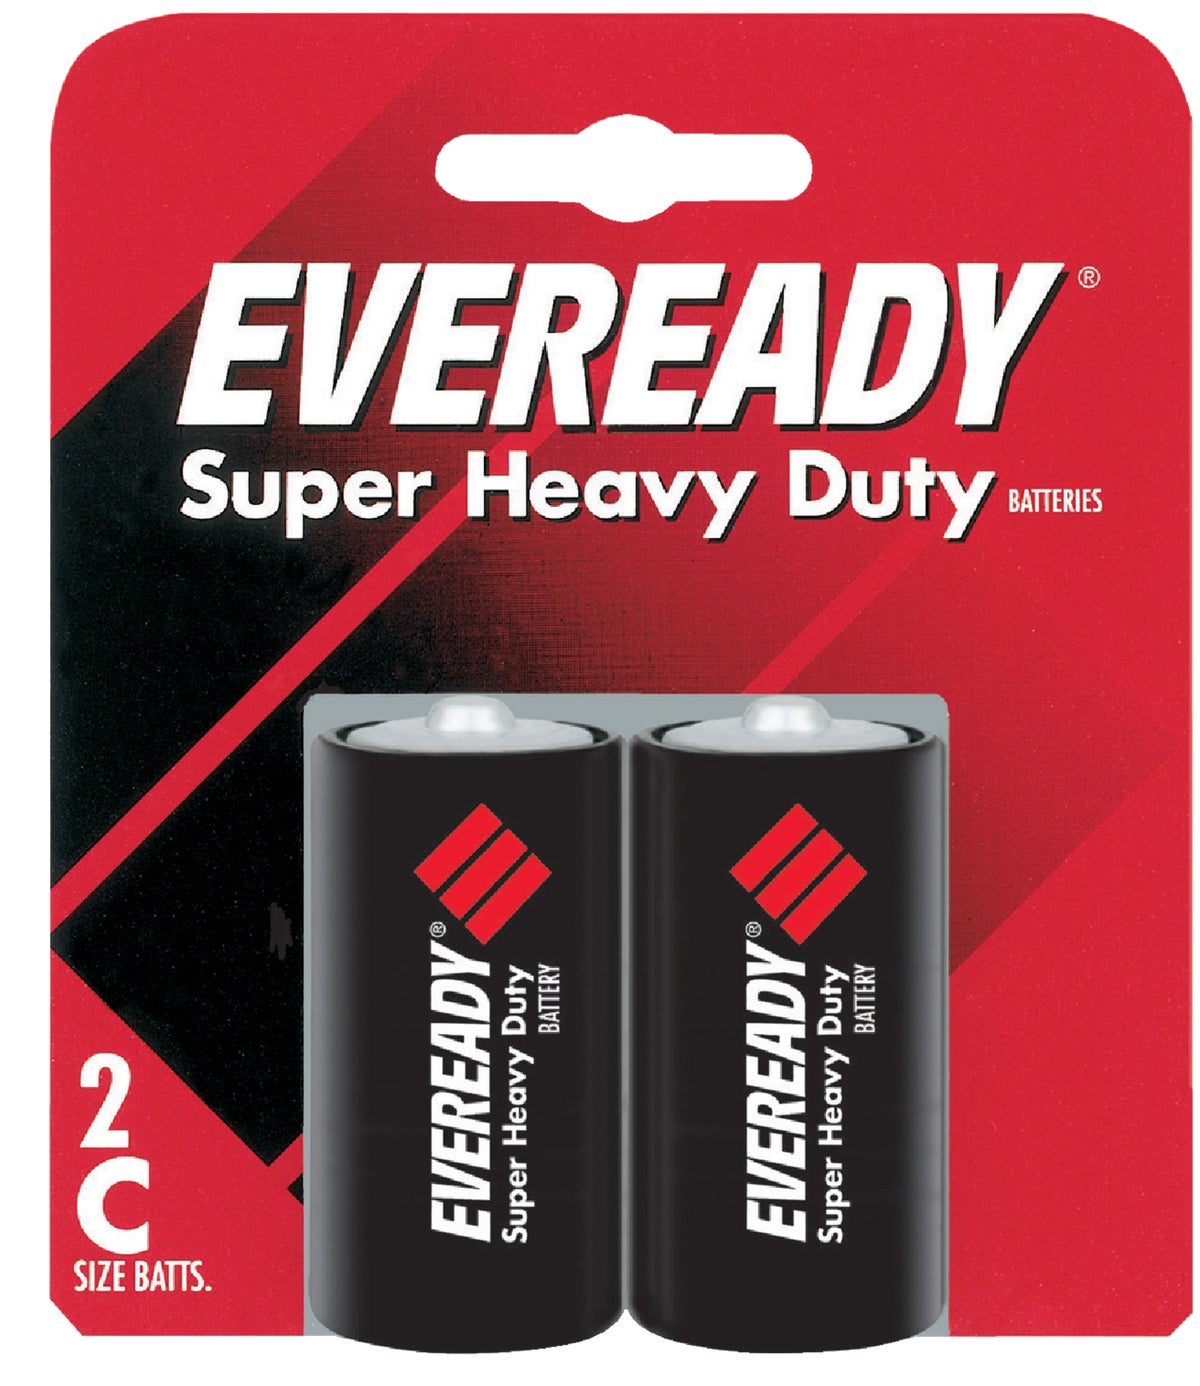 Eveready Super Heavy Duty Spring Top Lantern Battery, 6V - Midwest  Technology Products